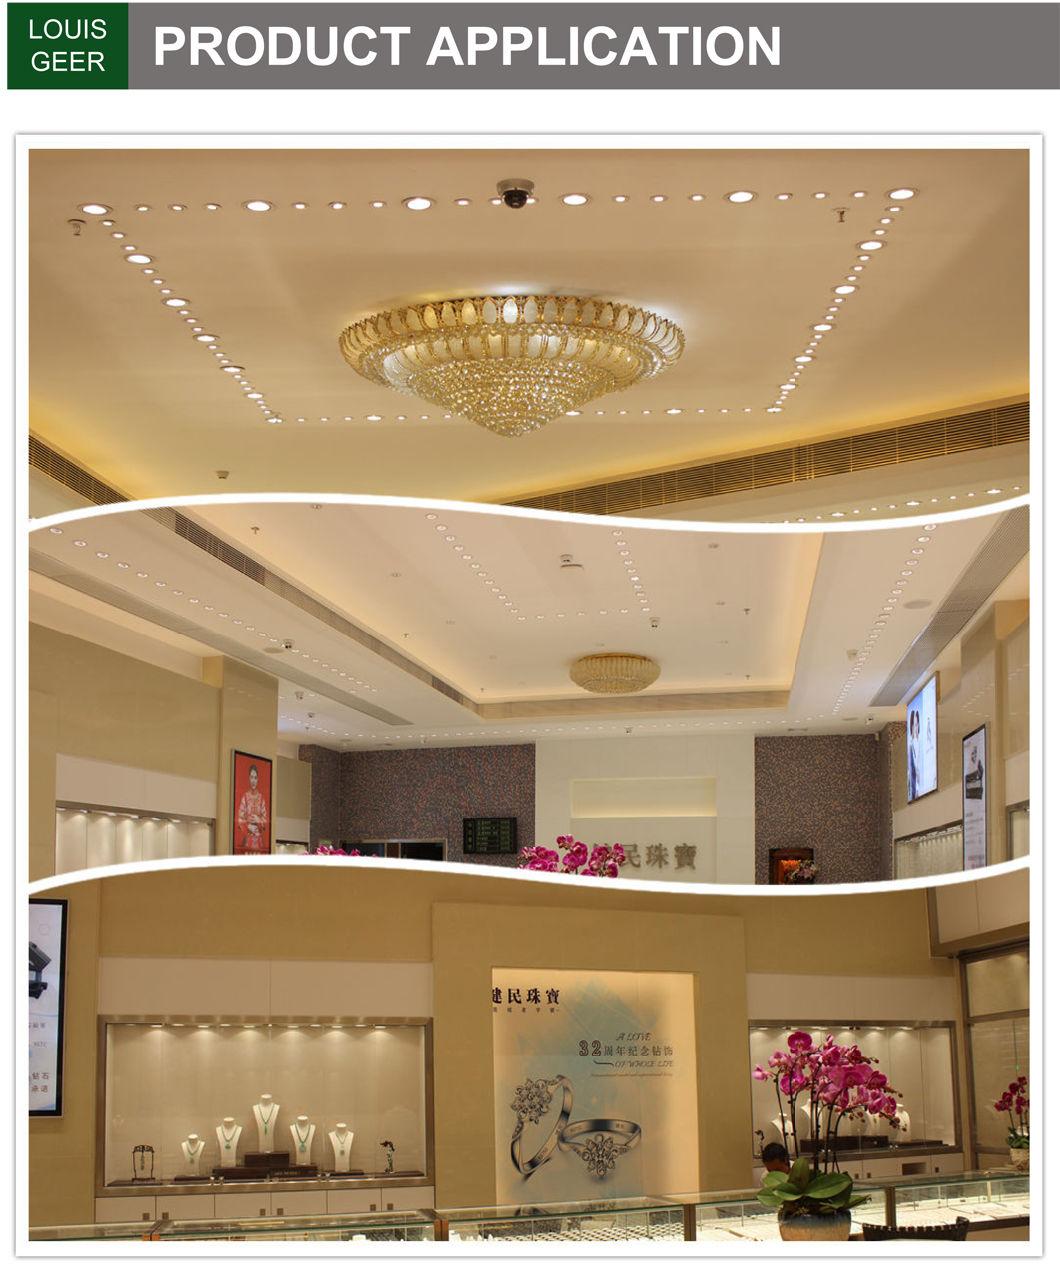 Commercial Electric LED Spot Light Home Lights LED Spots Decoration 5W 7W 10W Indoor Modern COB LED Recessed Downlight